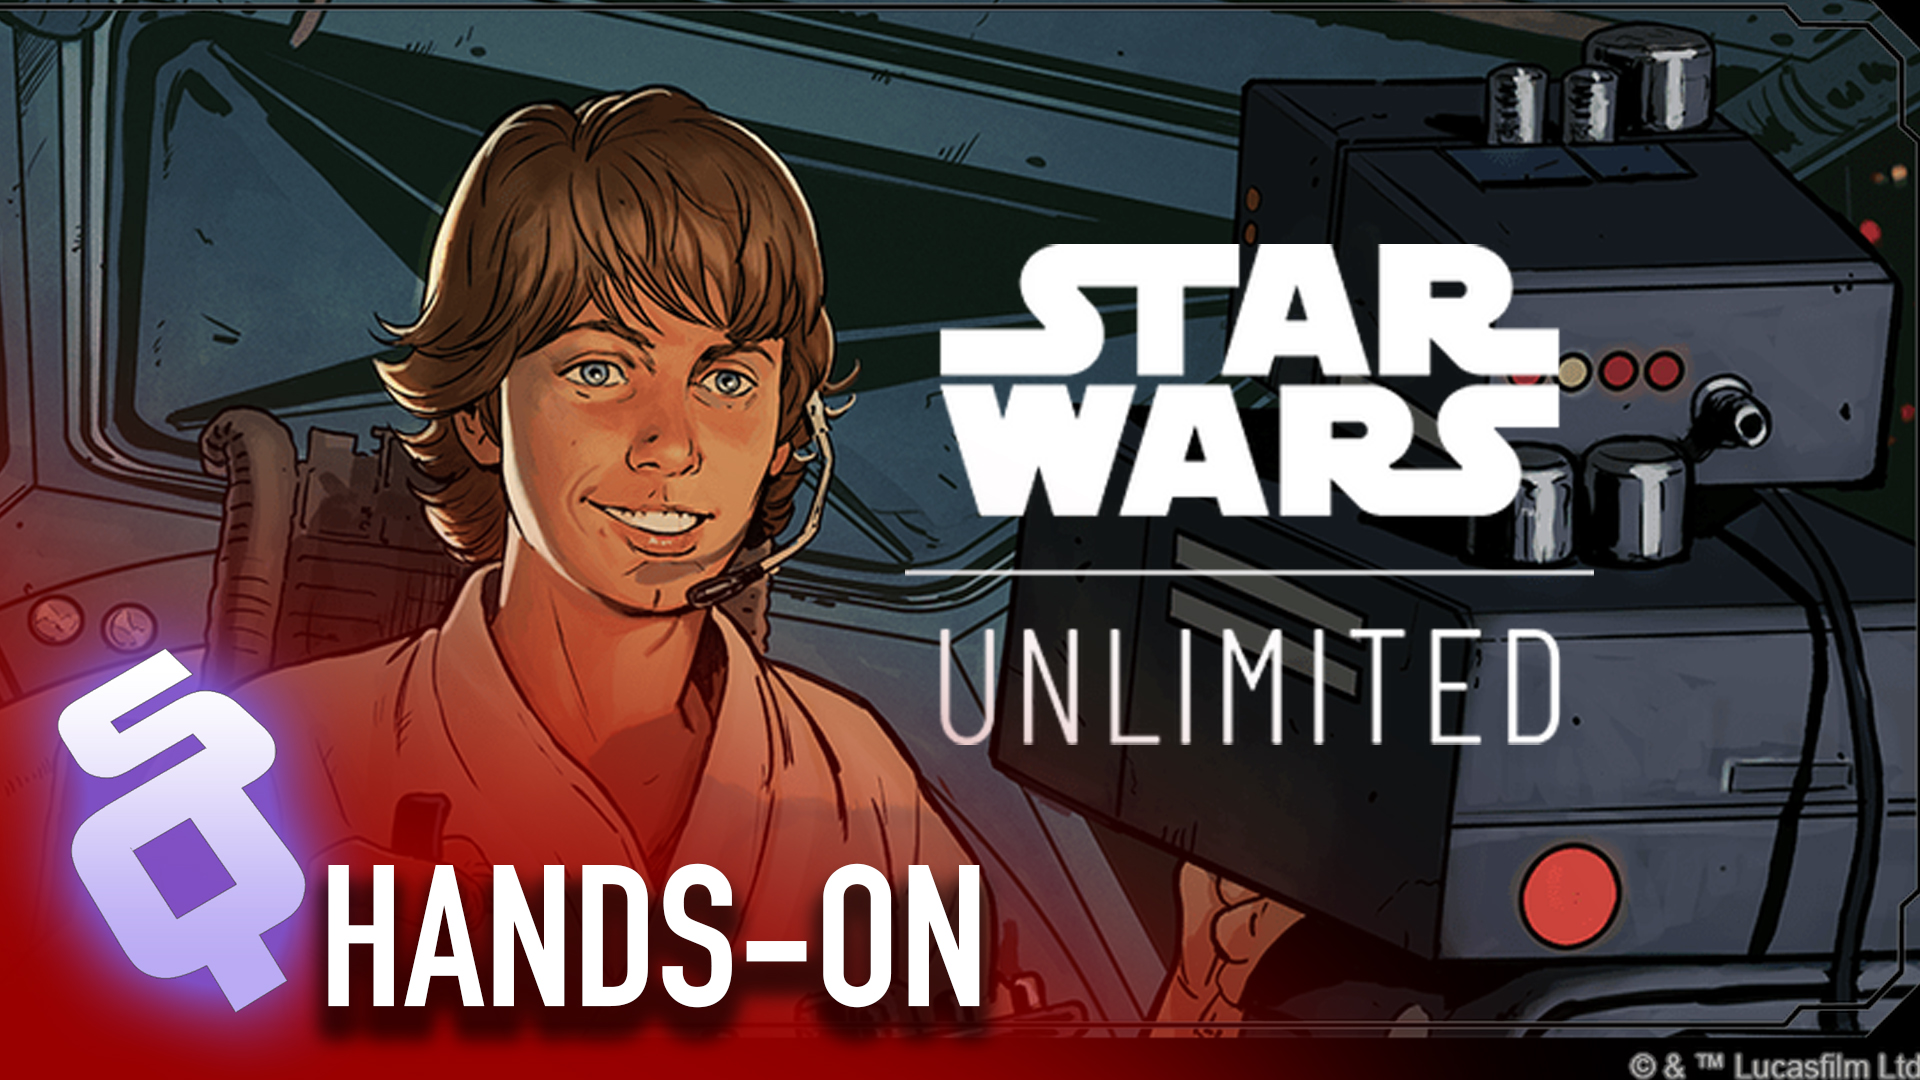 Star Wars Unlimited (hands-on preview)